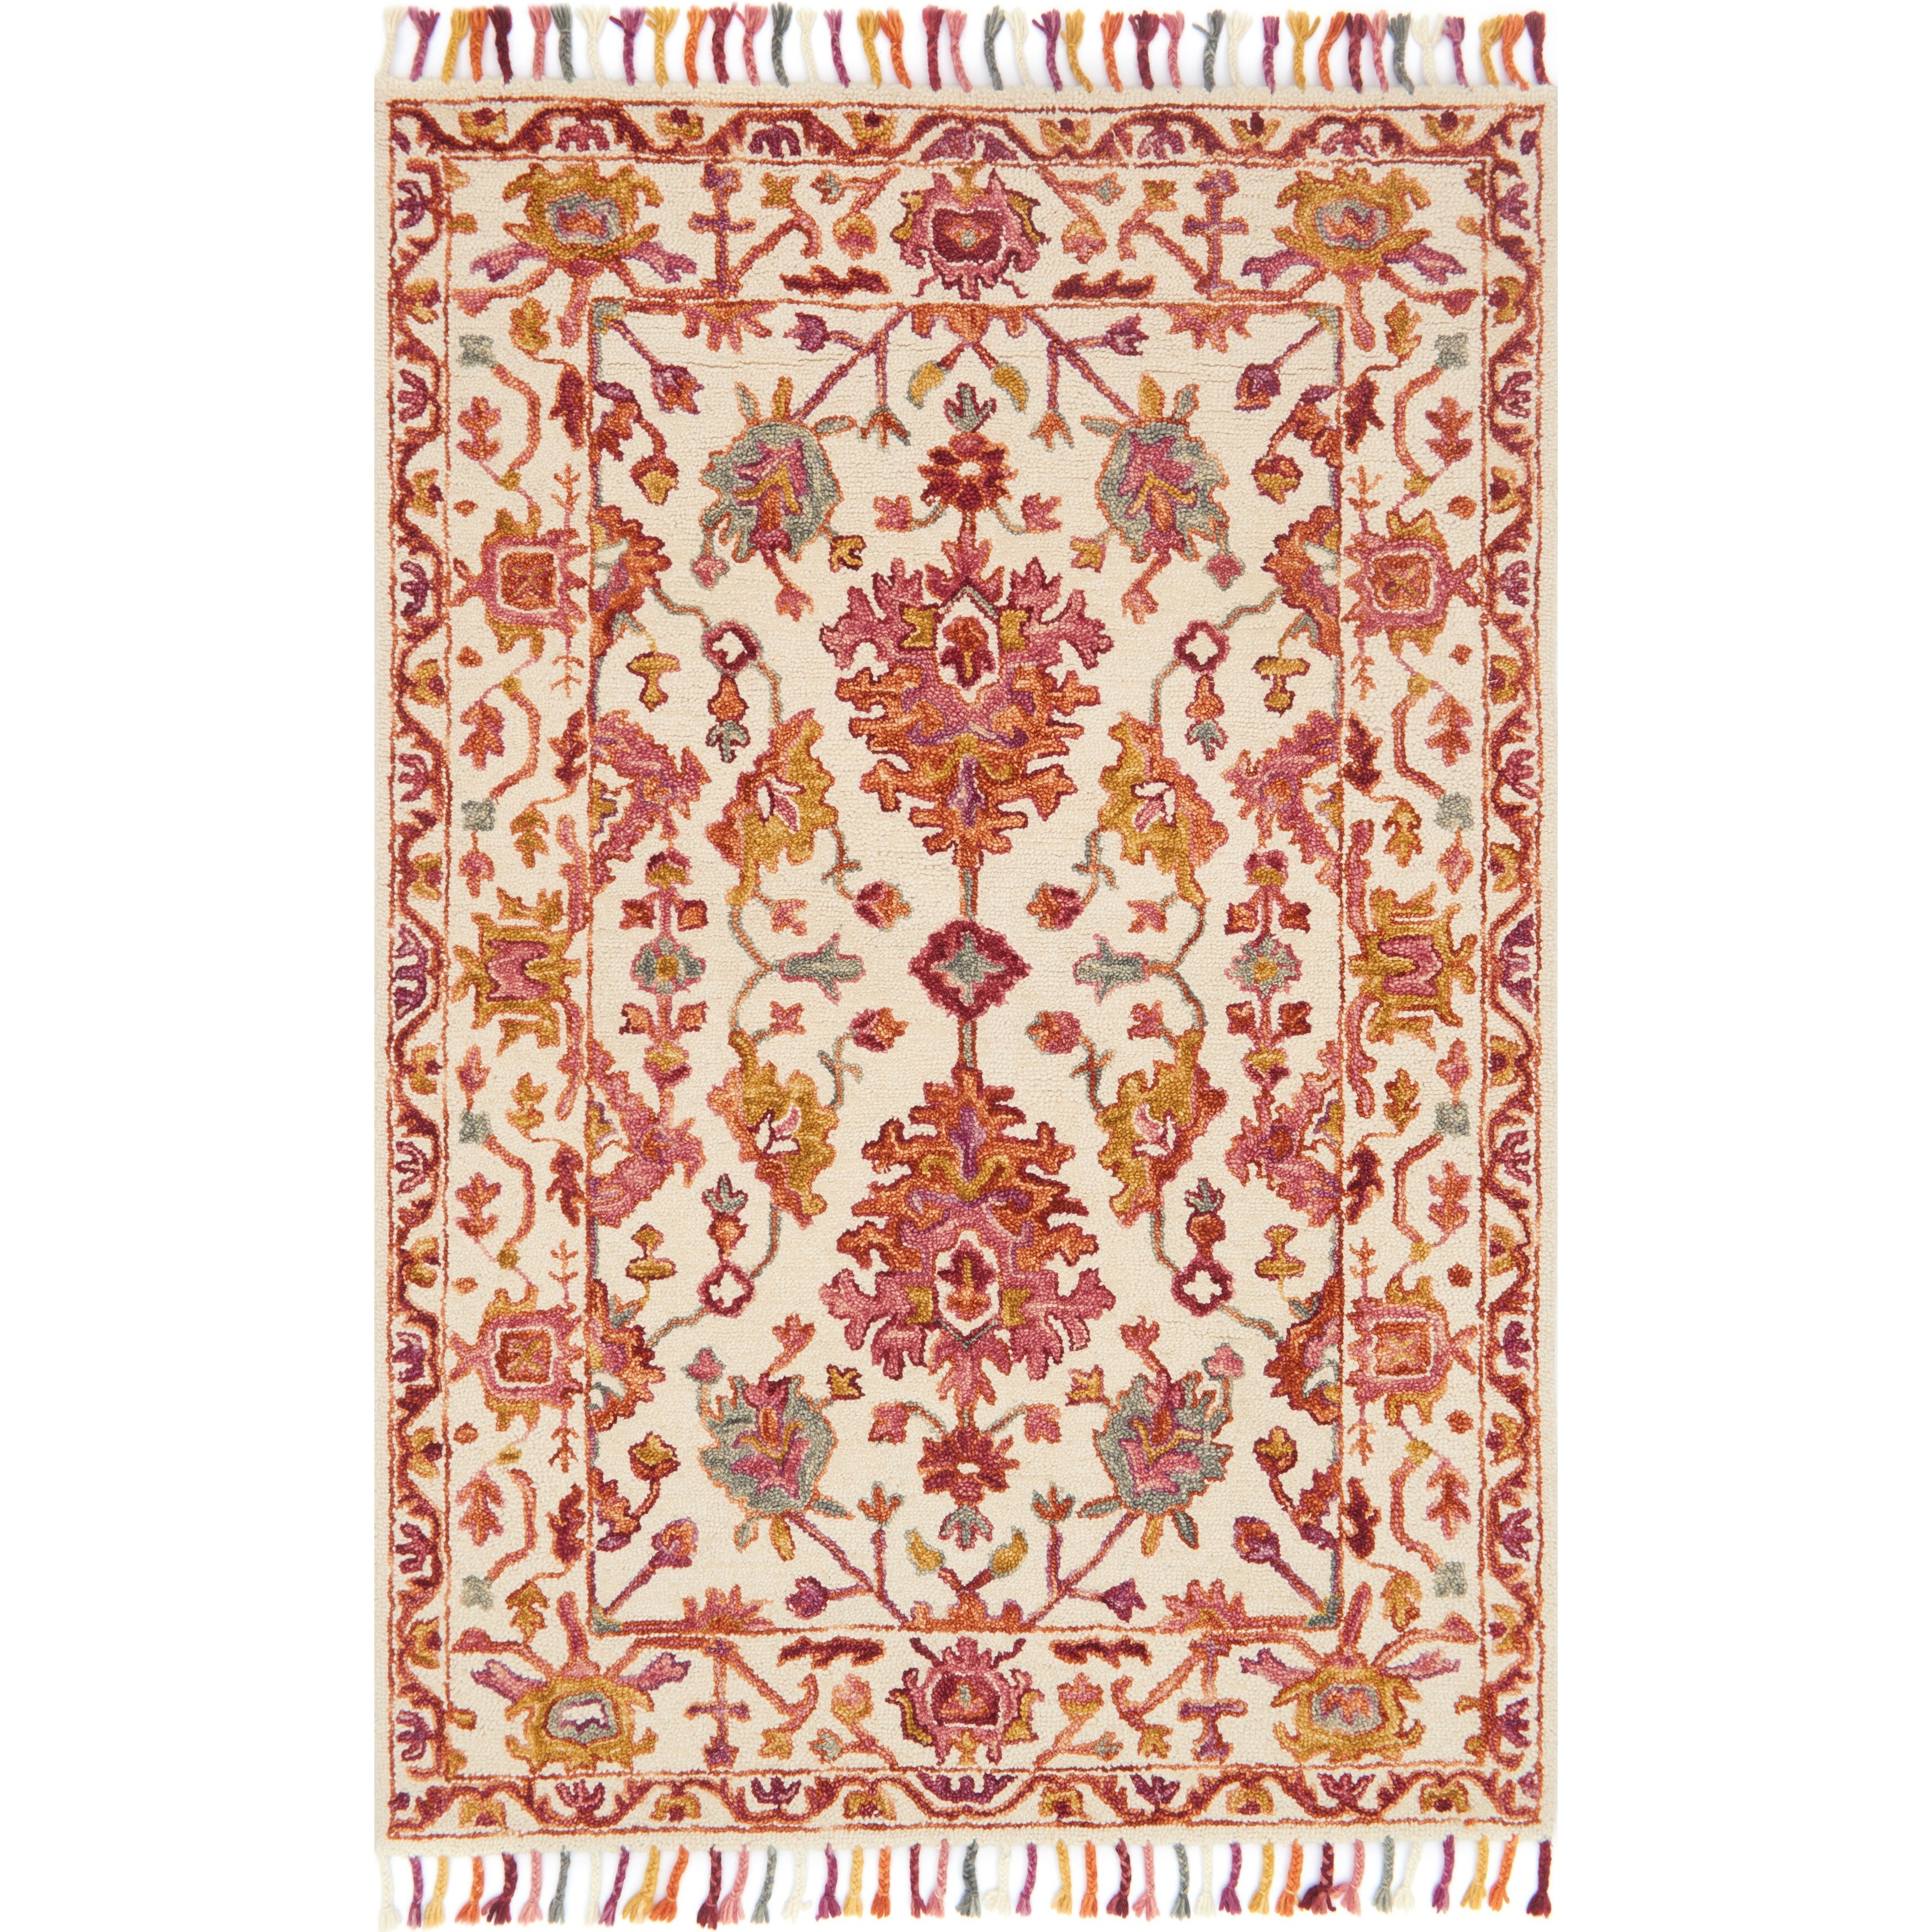 https://ak1.ostkcdn.com/images/products/is/images/direct/94793e54356057d663a9d3321f61aac199fb5075/Alexander-Home-Sahara-Botanical-Berry-Hand-Hooked-Wool-Area-Rug.jpg